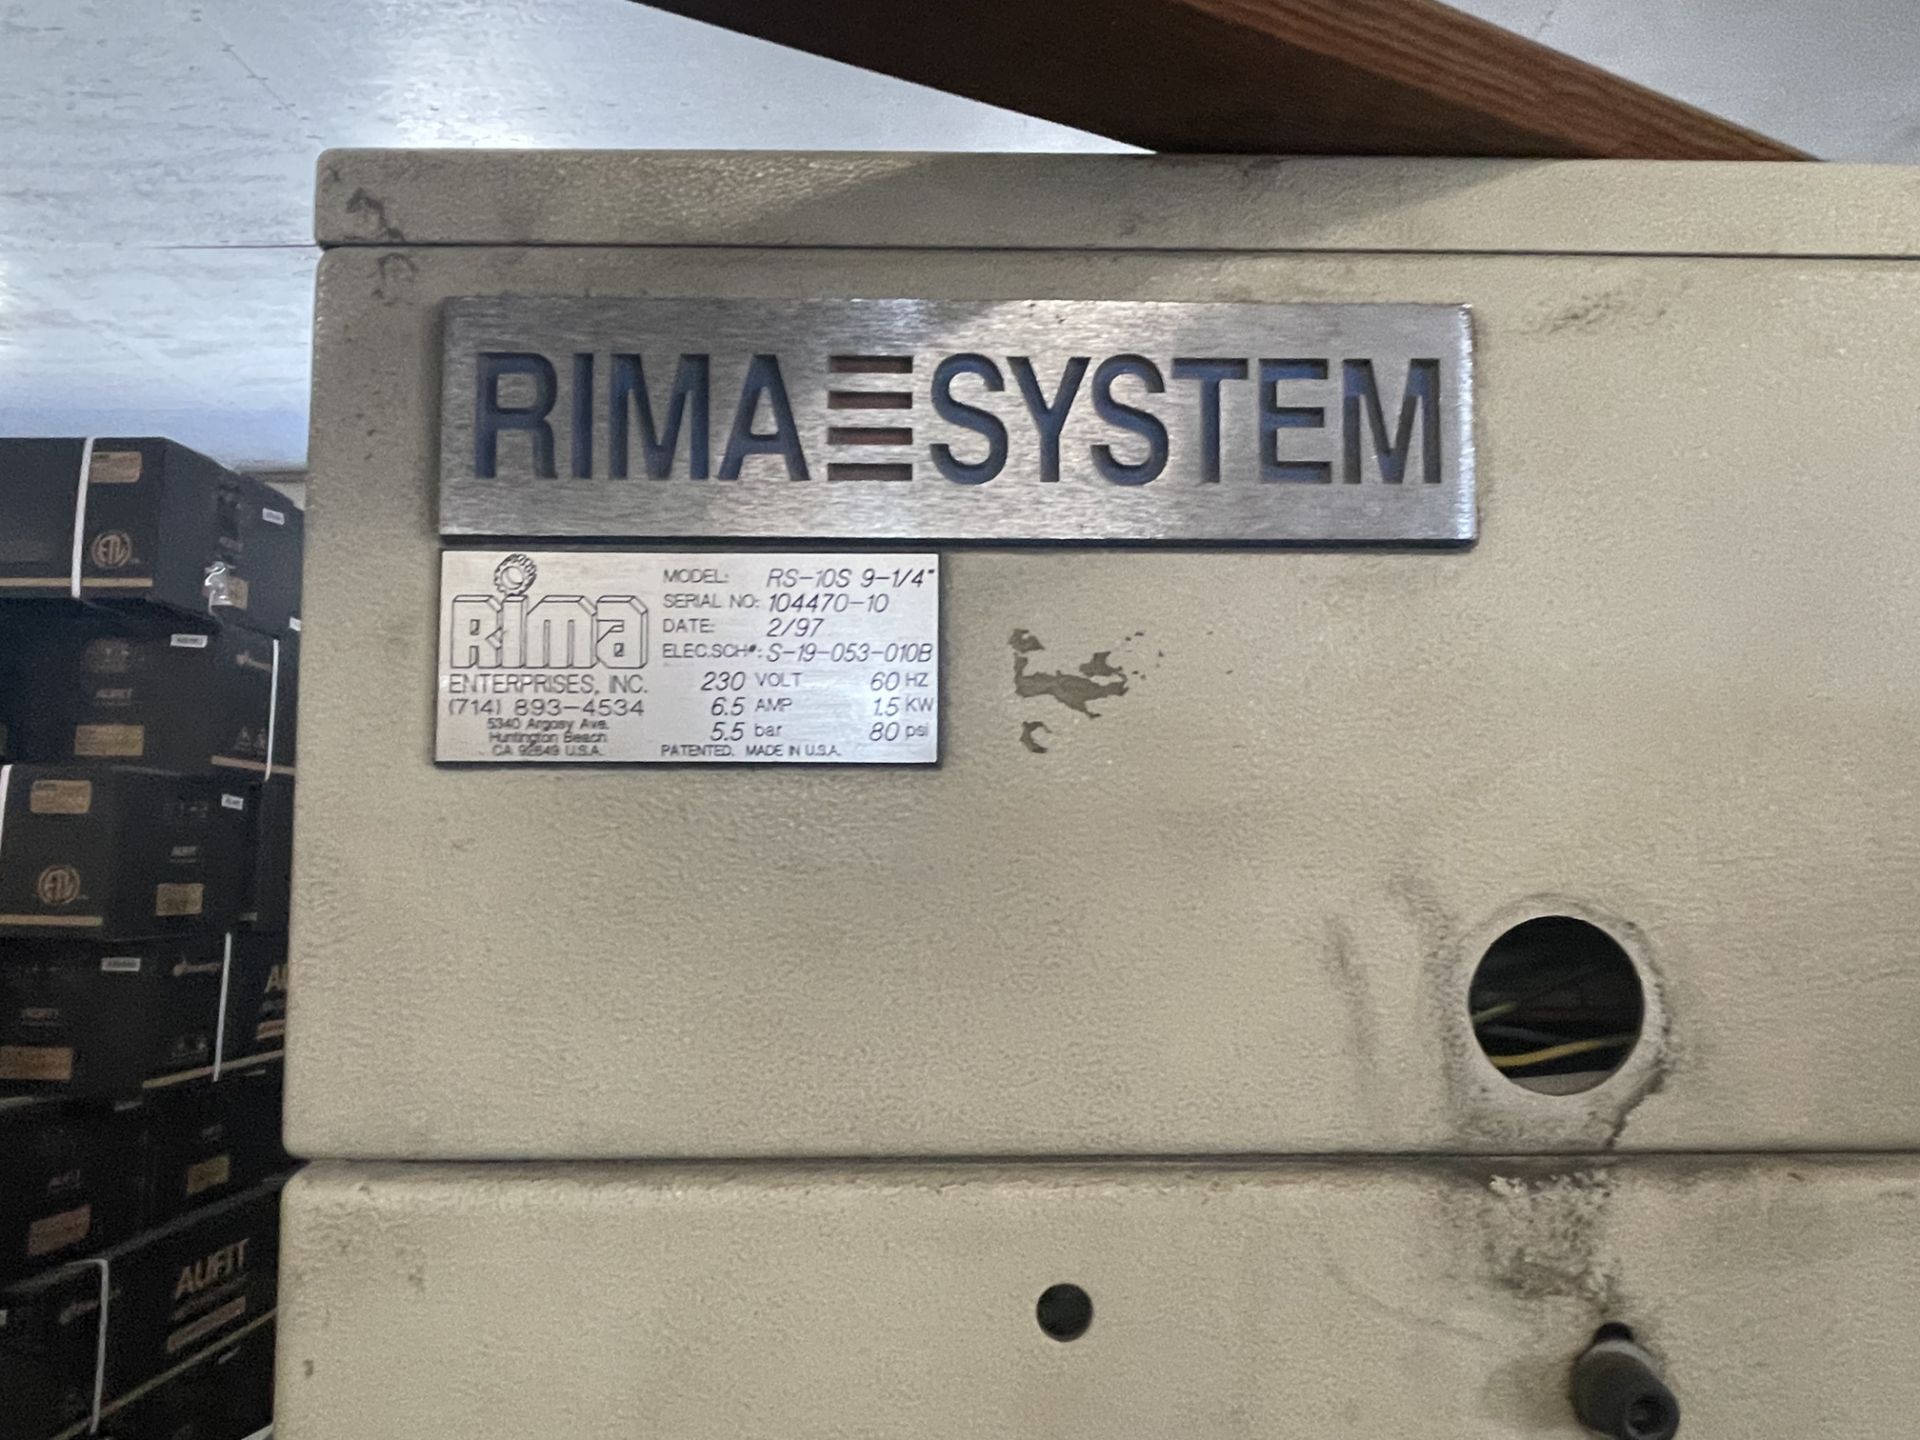 Rima-System Bindery Stacker - Image 4 of 5